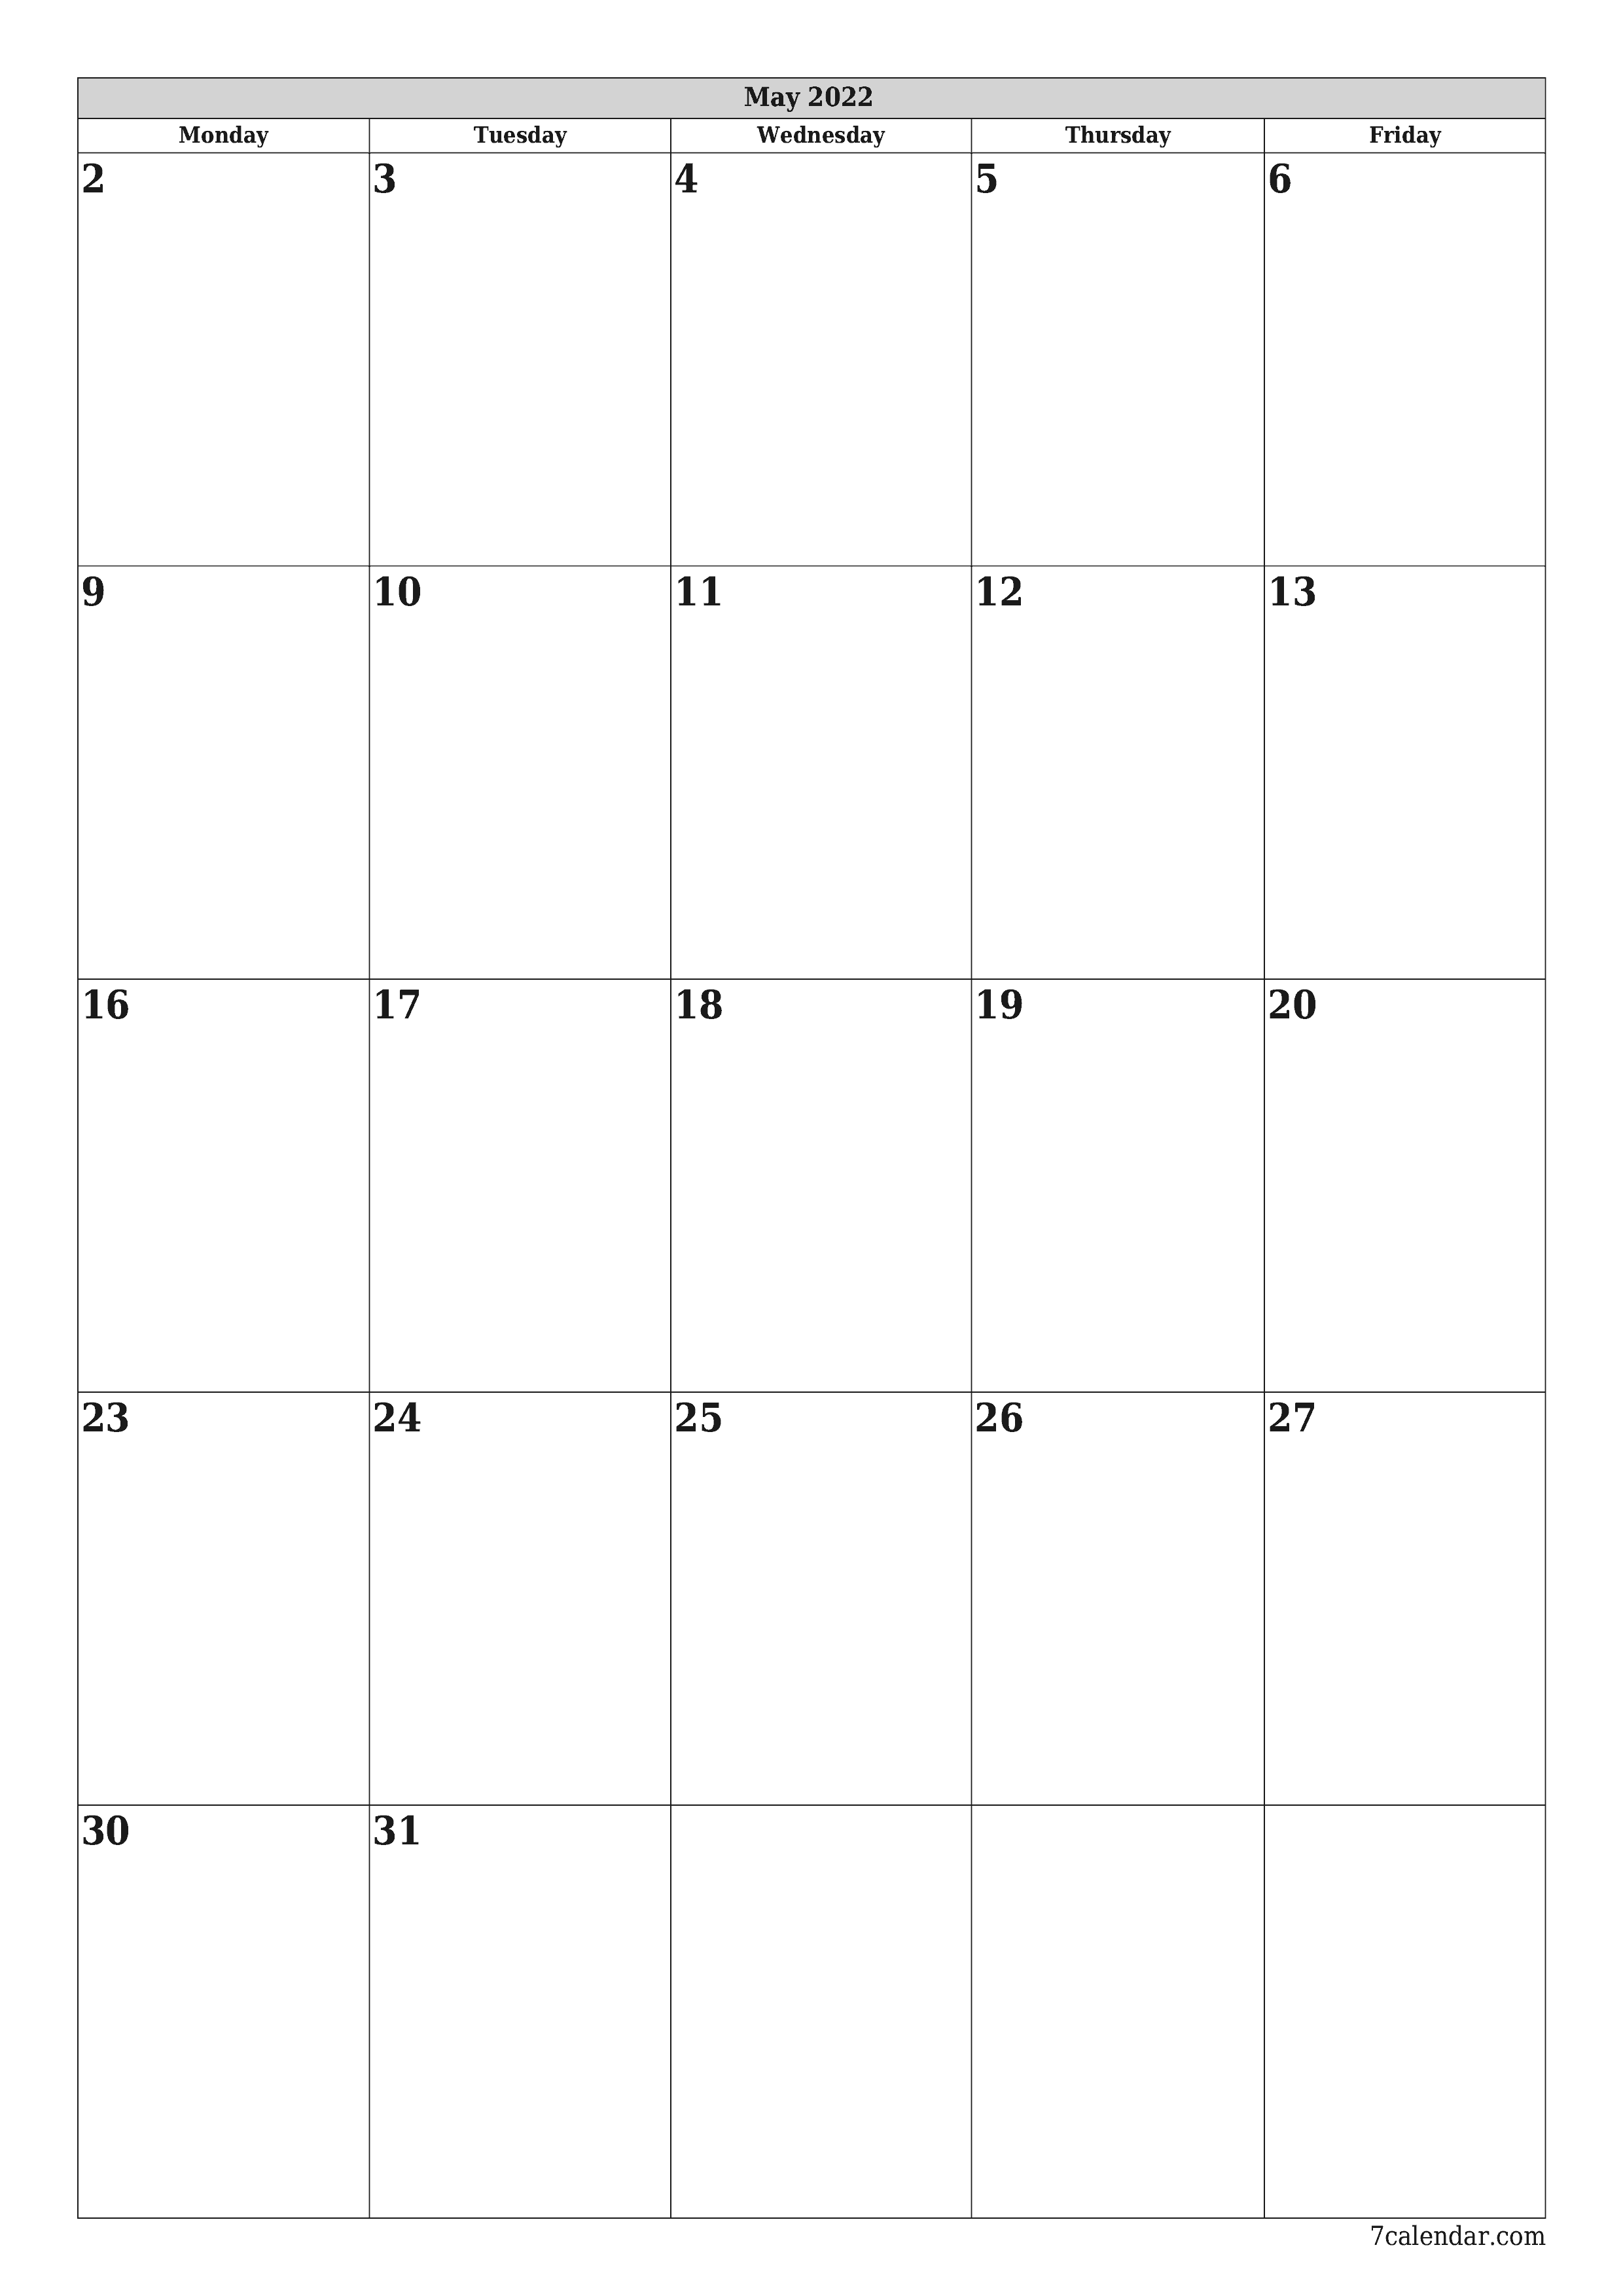 Blank monthly printable calendar and planner for month May 2022 with notes save and print to PDF PNG English - 7calendar.com